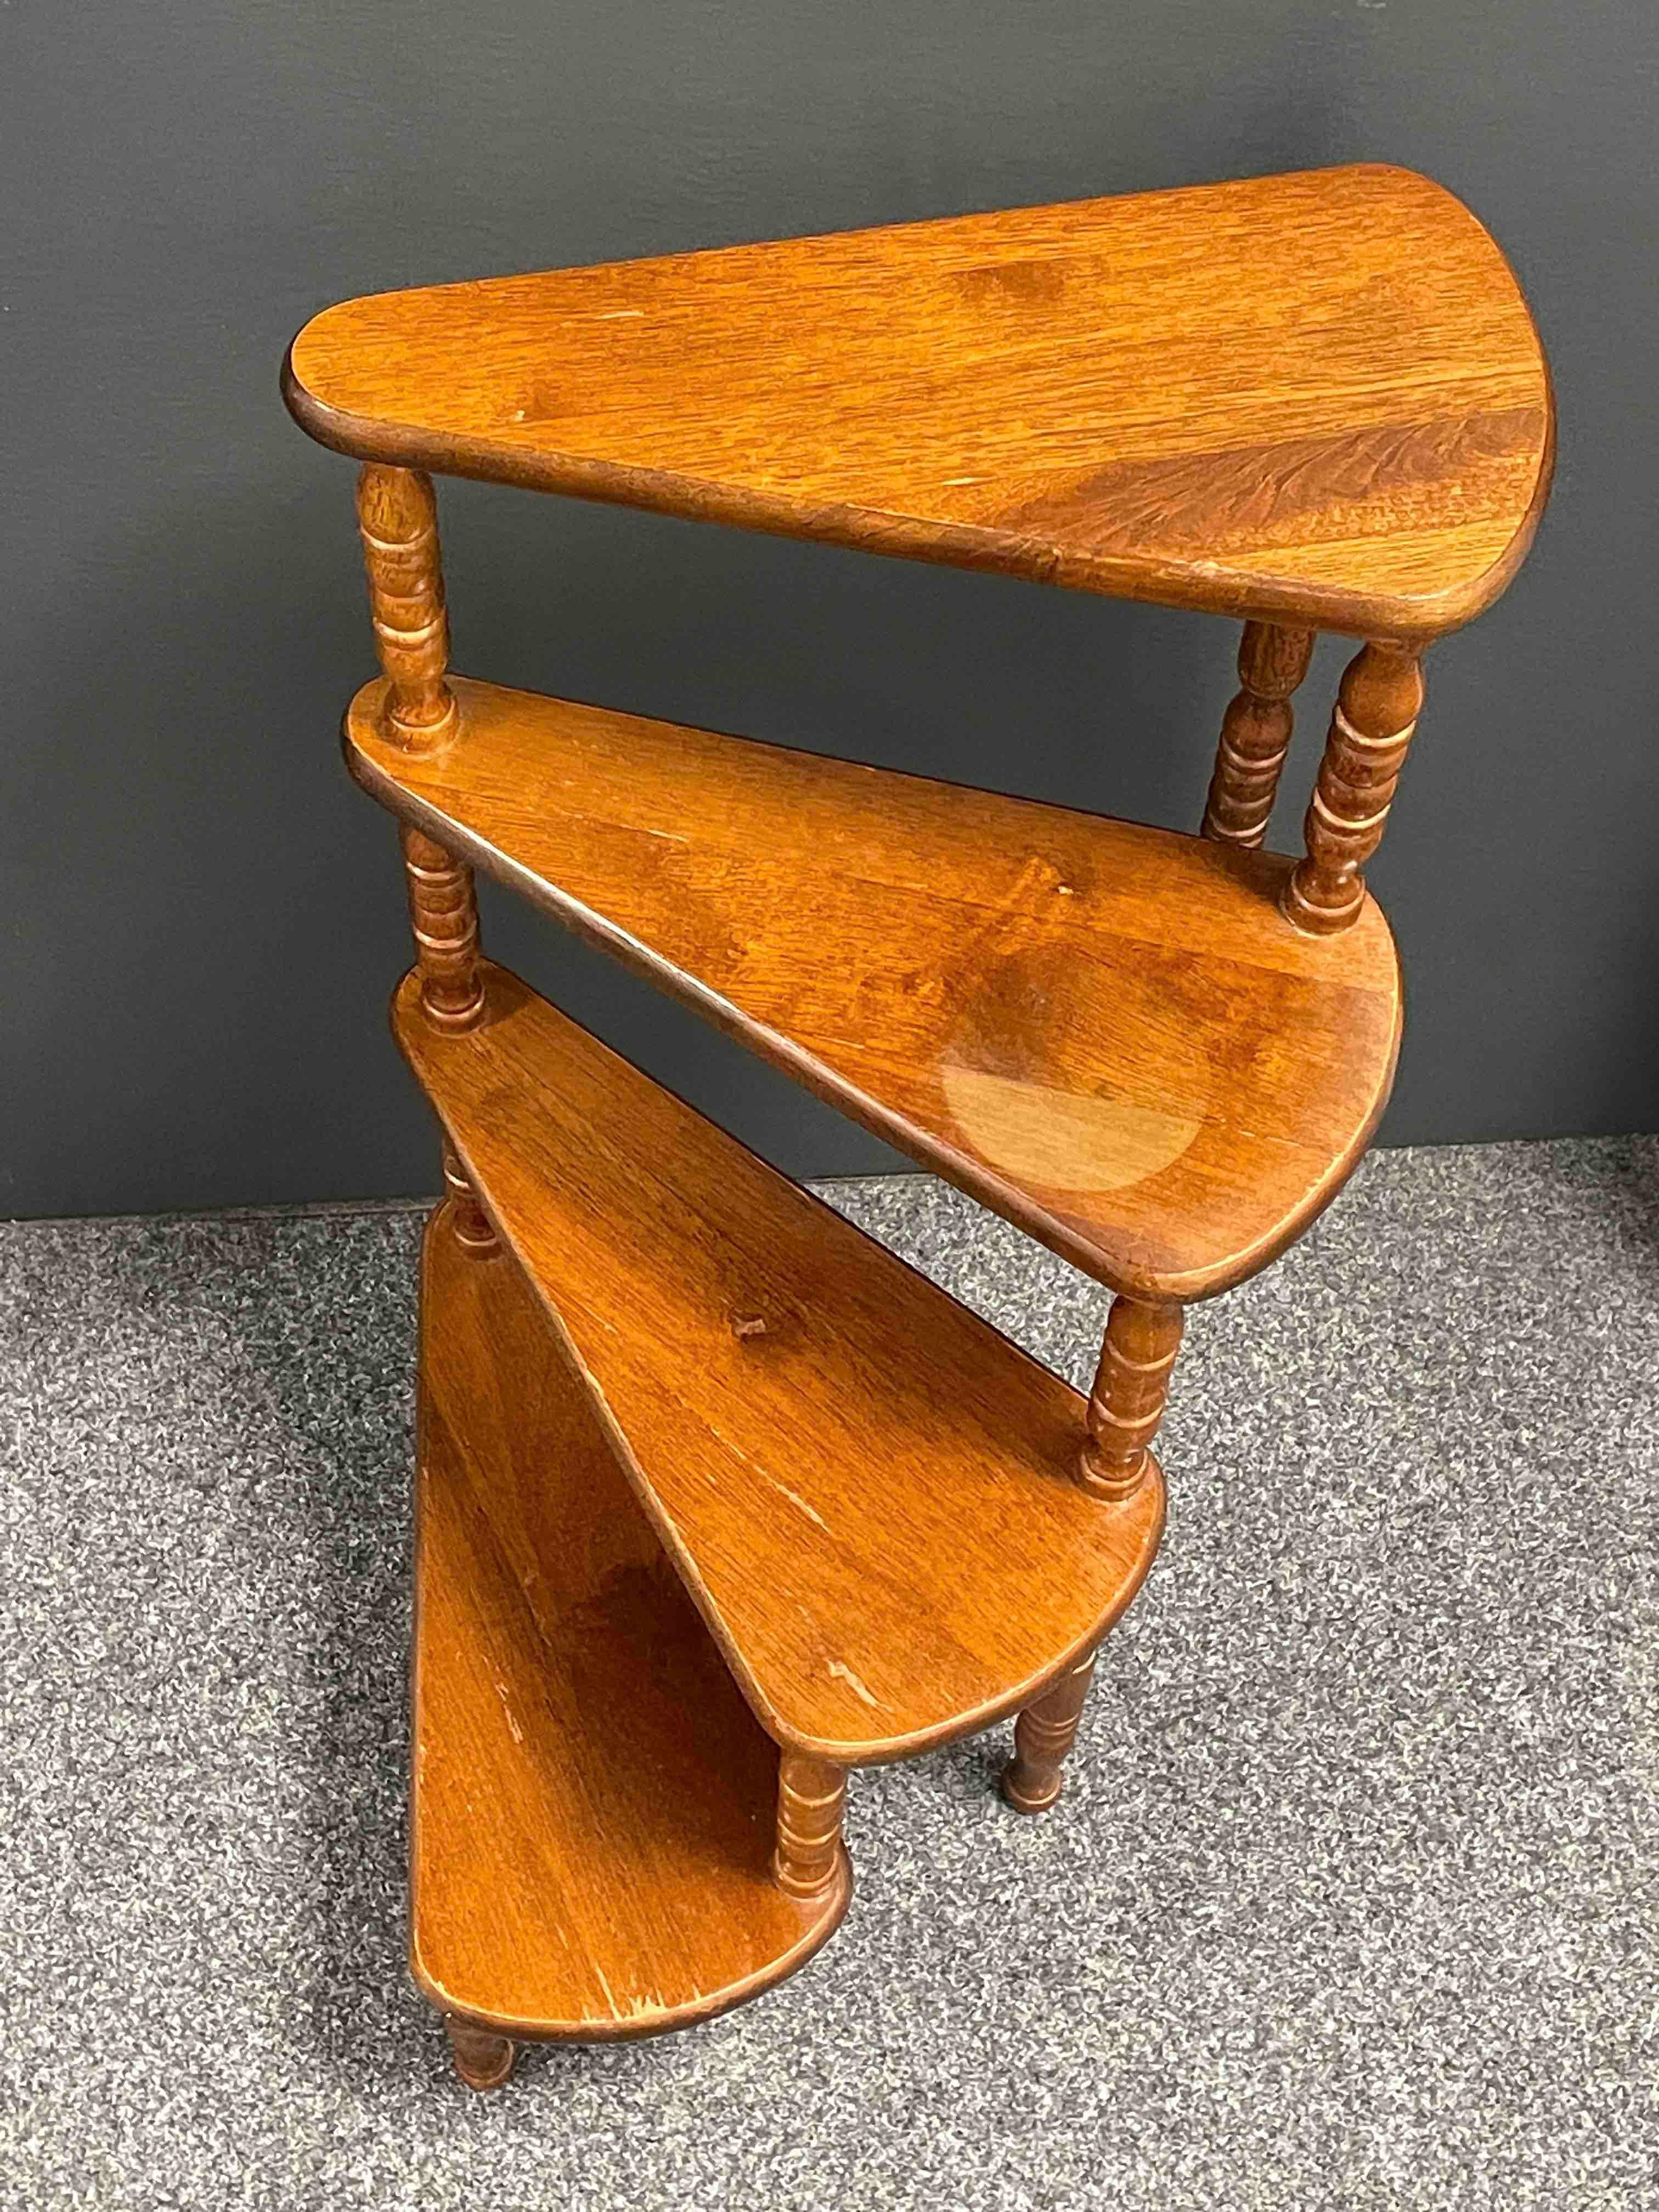 Mid-20th Century German Carved Wood Spiral Step Library Ladder 1